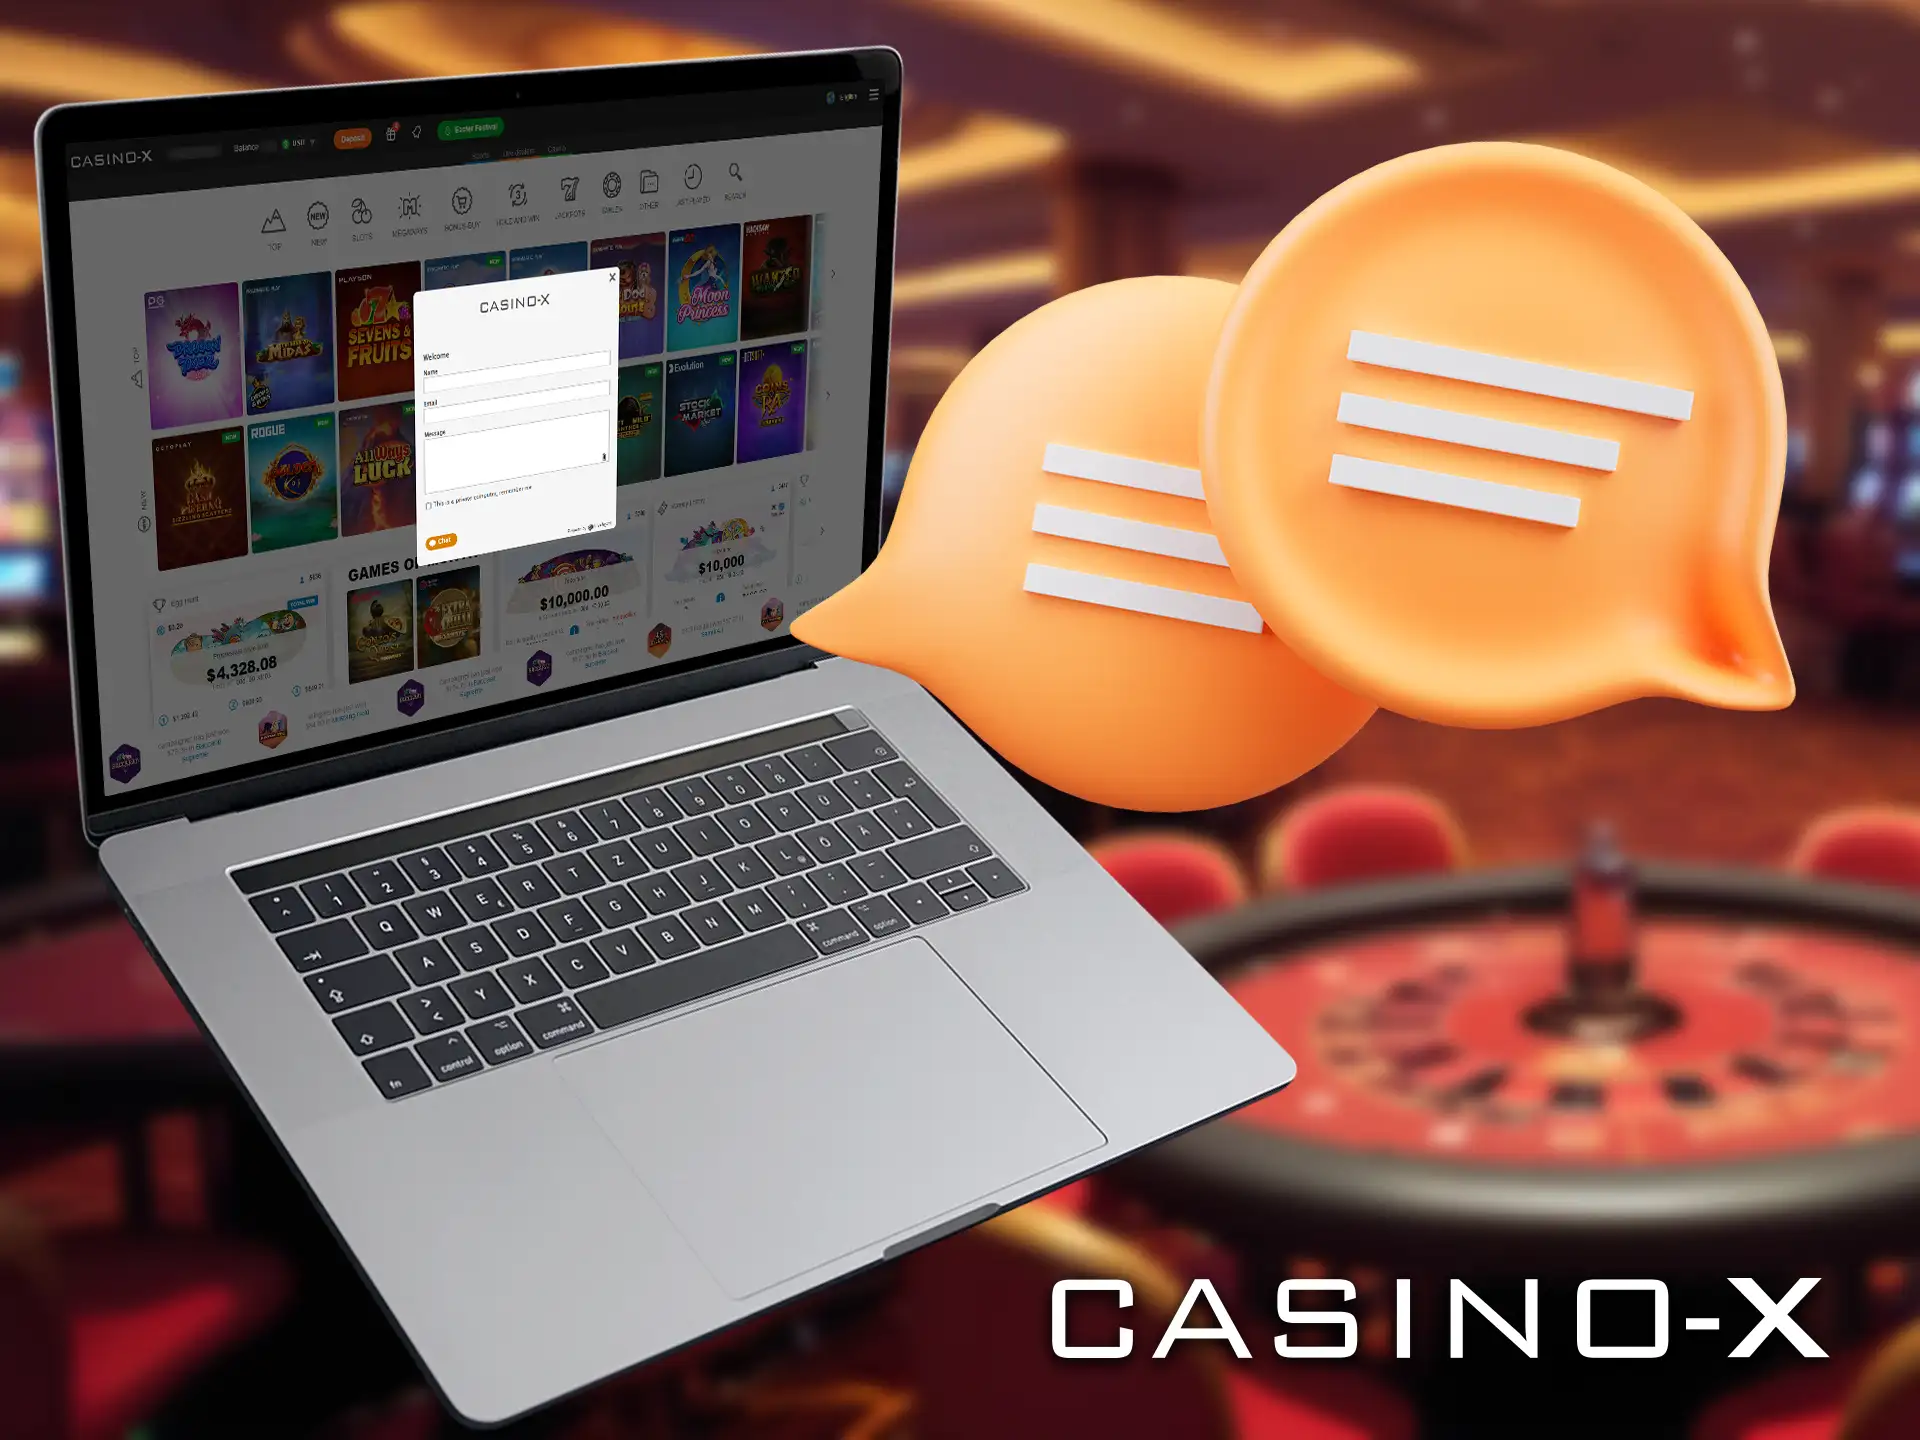 Casino-X provides friendly customer support that's available 24/7 to assist you.